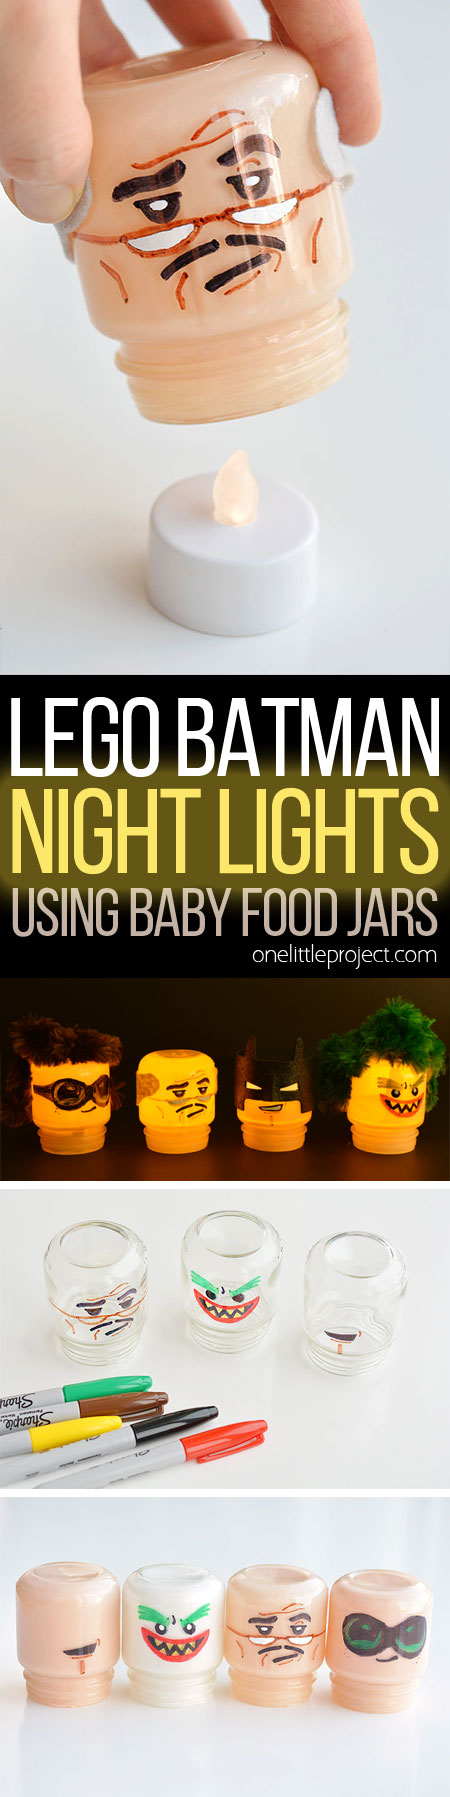 Baby food jars are the exact same shape as LEGO heads!!! Just draw on the faces and paint the jars! These Lego Batman night lights are SO CUTE! What a fun little project! #sponsored